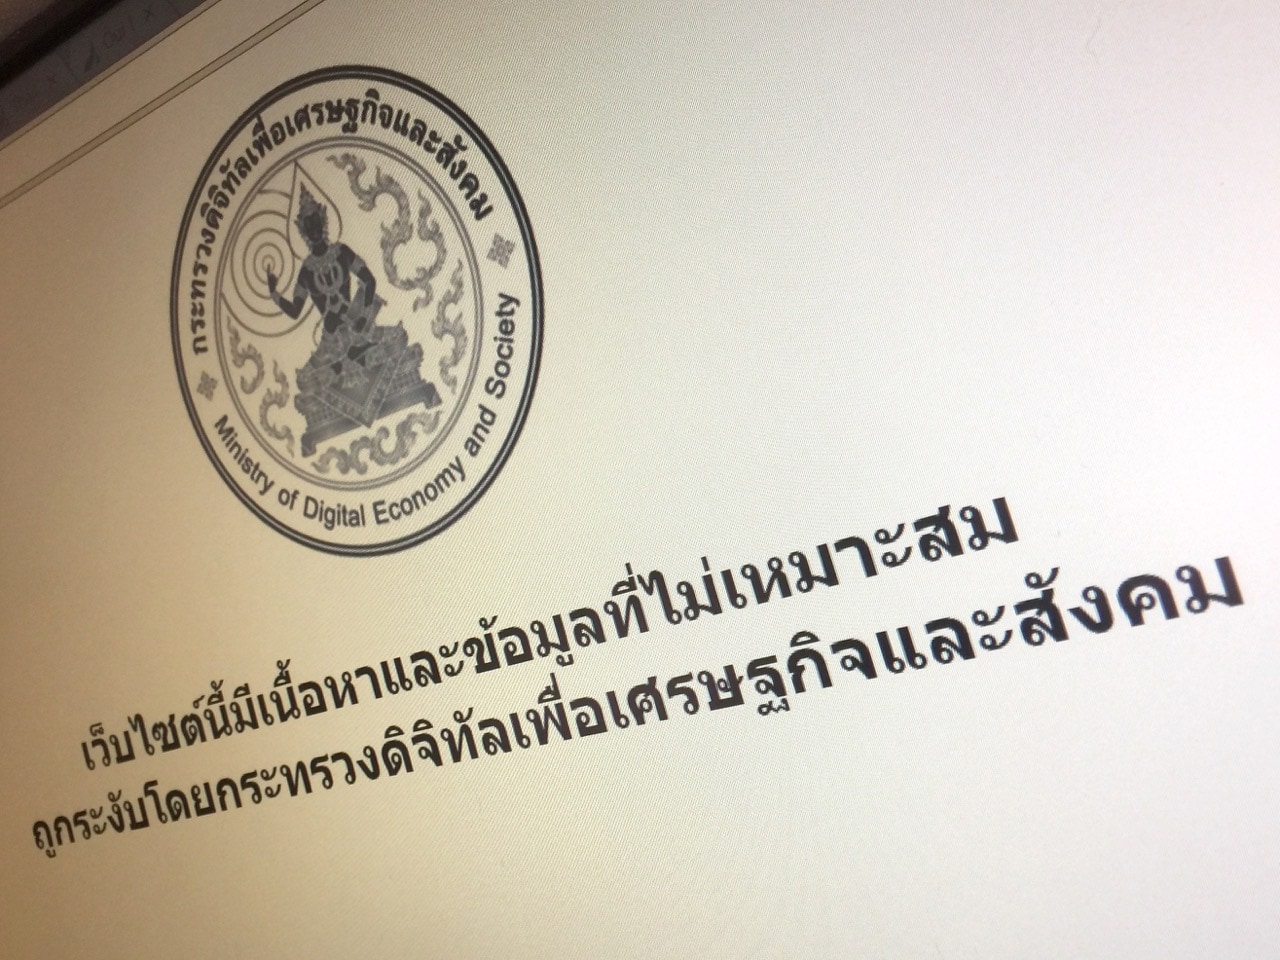 On 17 November 2016, a blocked website shows a notice from Thailand's Ministry of Digital Economy and Society with the message, "This website contains content and information that is deemed inappropriate", AP Photo